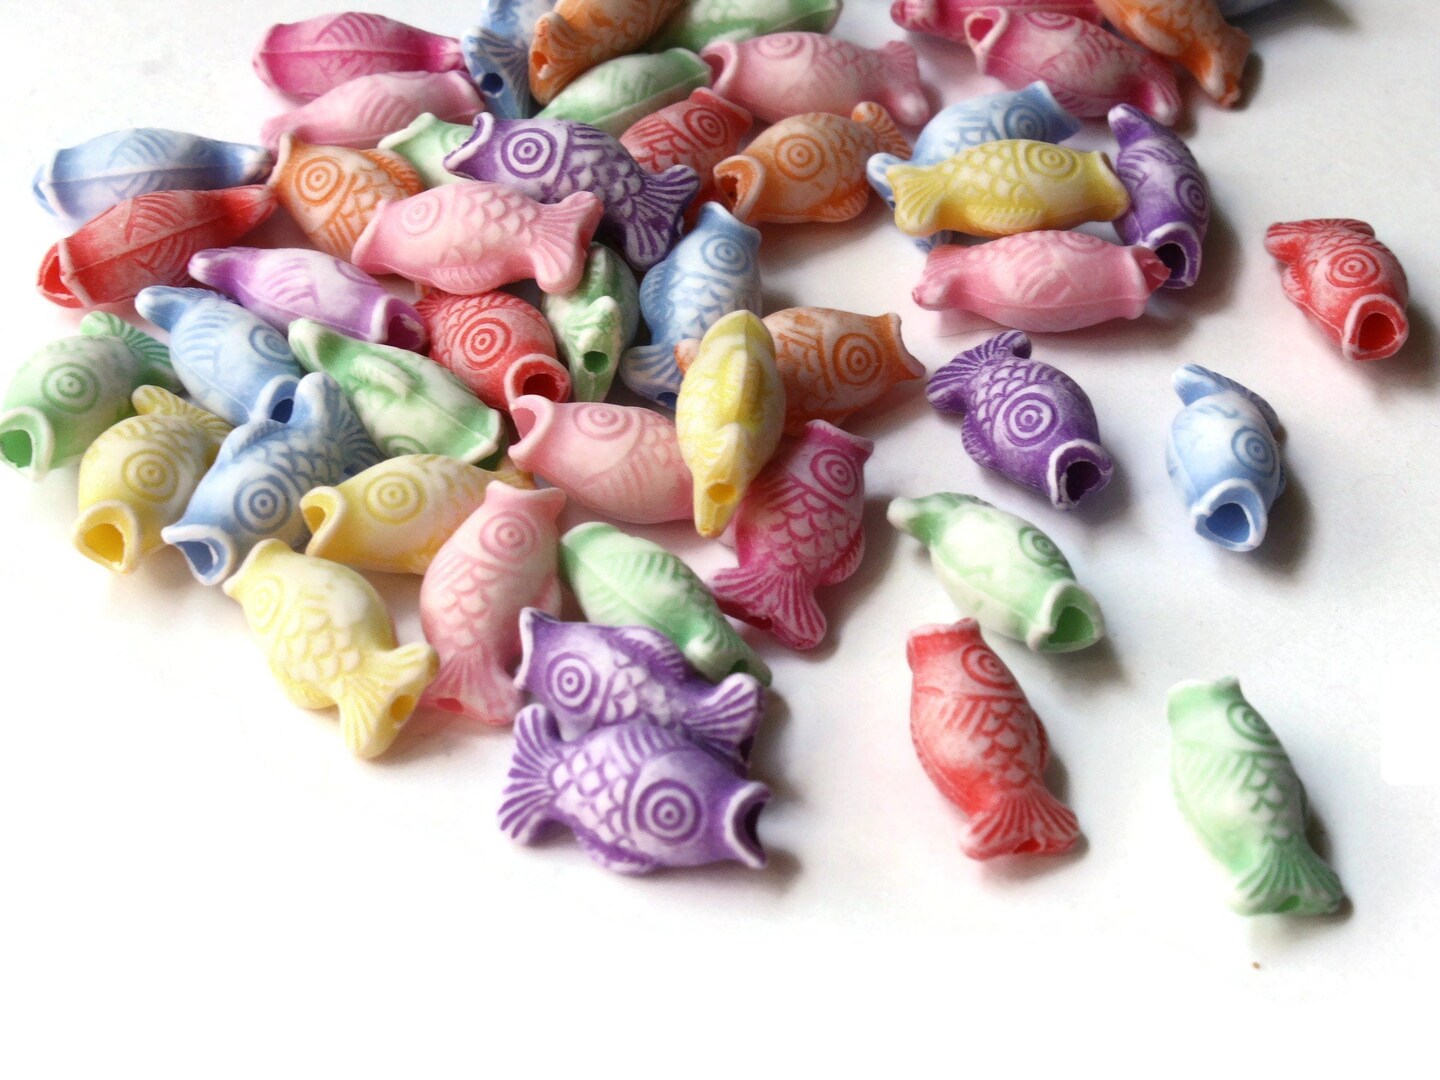 50 17mm Mixed Colors Fish Plastic Beads Loose Miniature Animal Beads